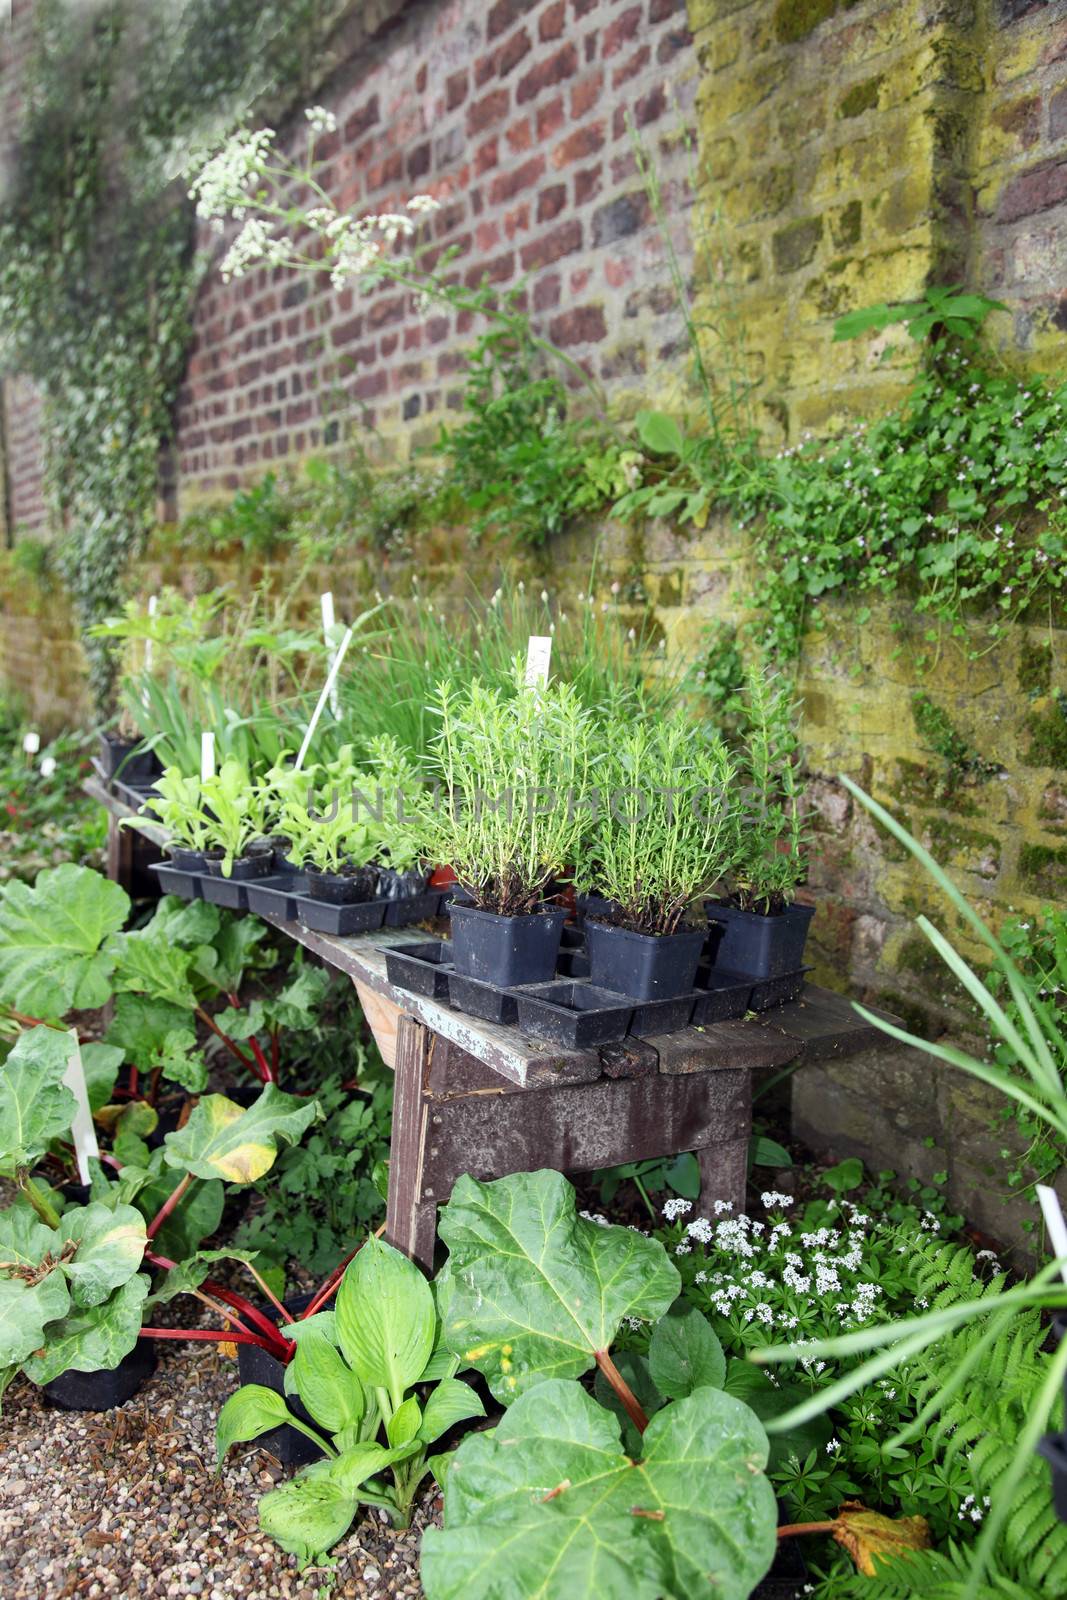 Potted plants growing on a trestle table alongside an old brick garden wall conceptual of gardening as a hobby